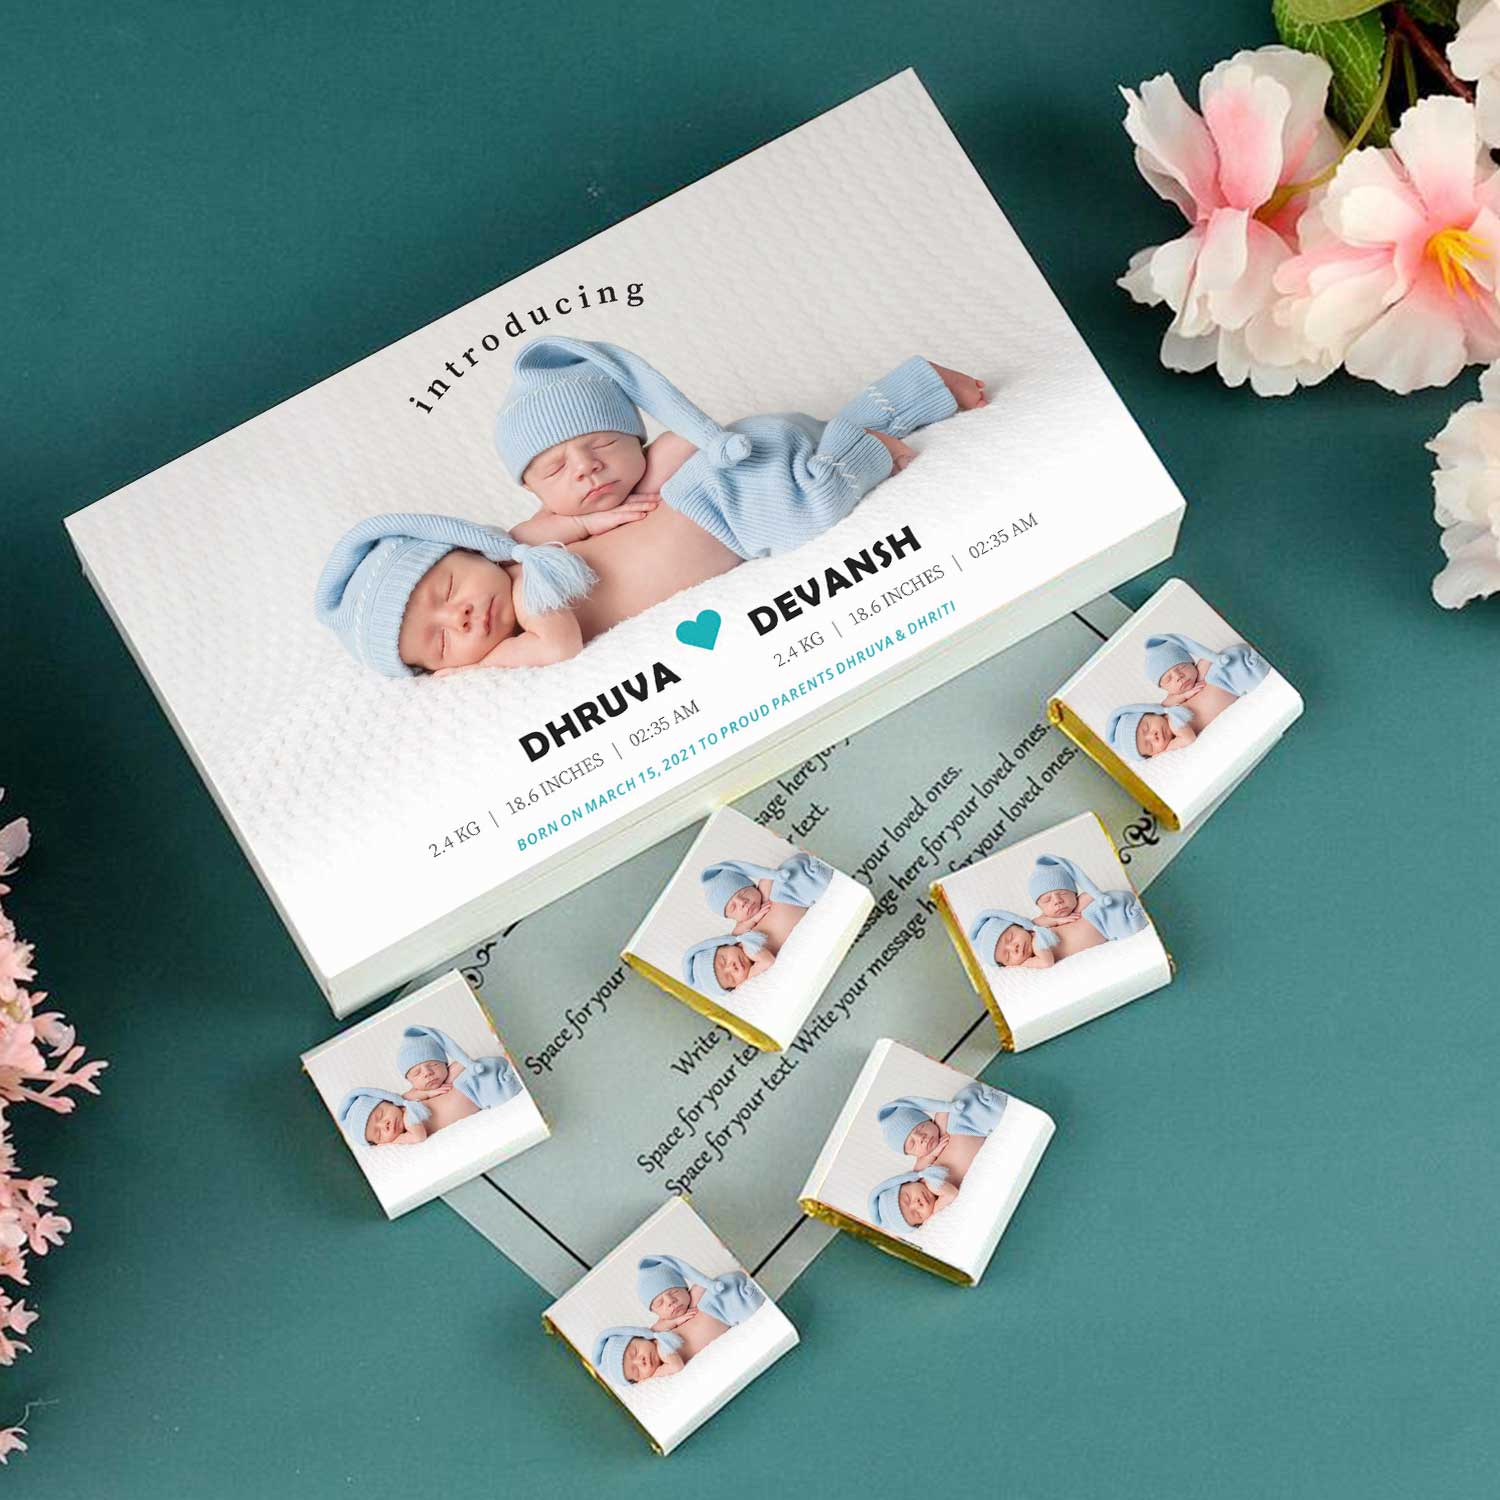 Cute blue heart printed wrapped chocolates twins announcement Unusual newborn baby boy gifts  Best baby gifts for new moms.